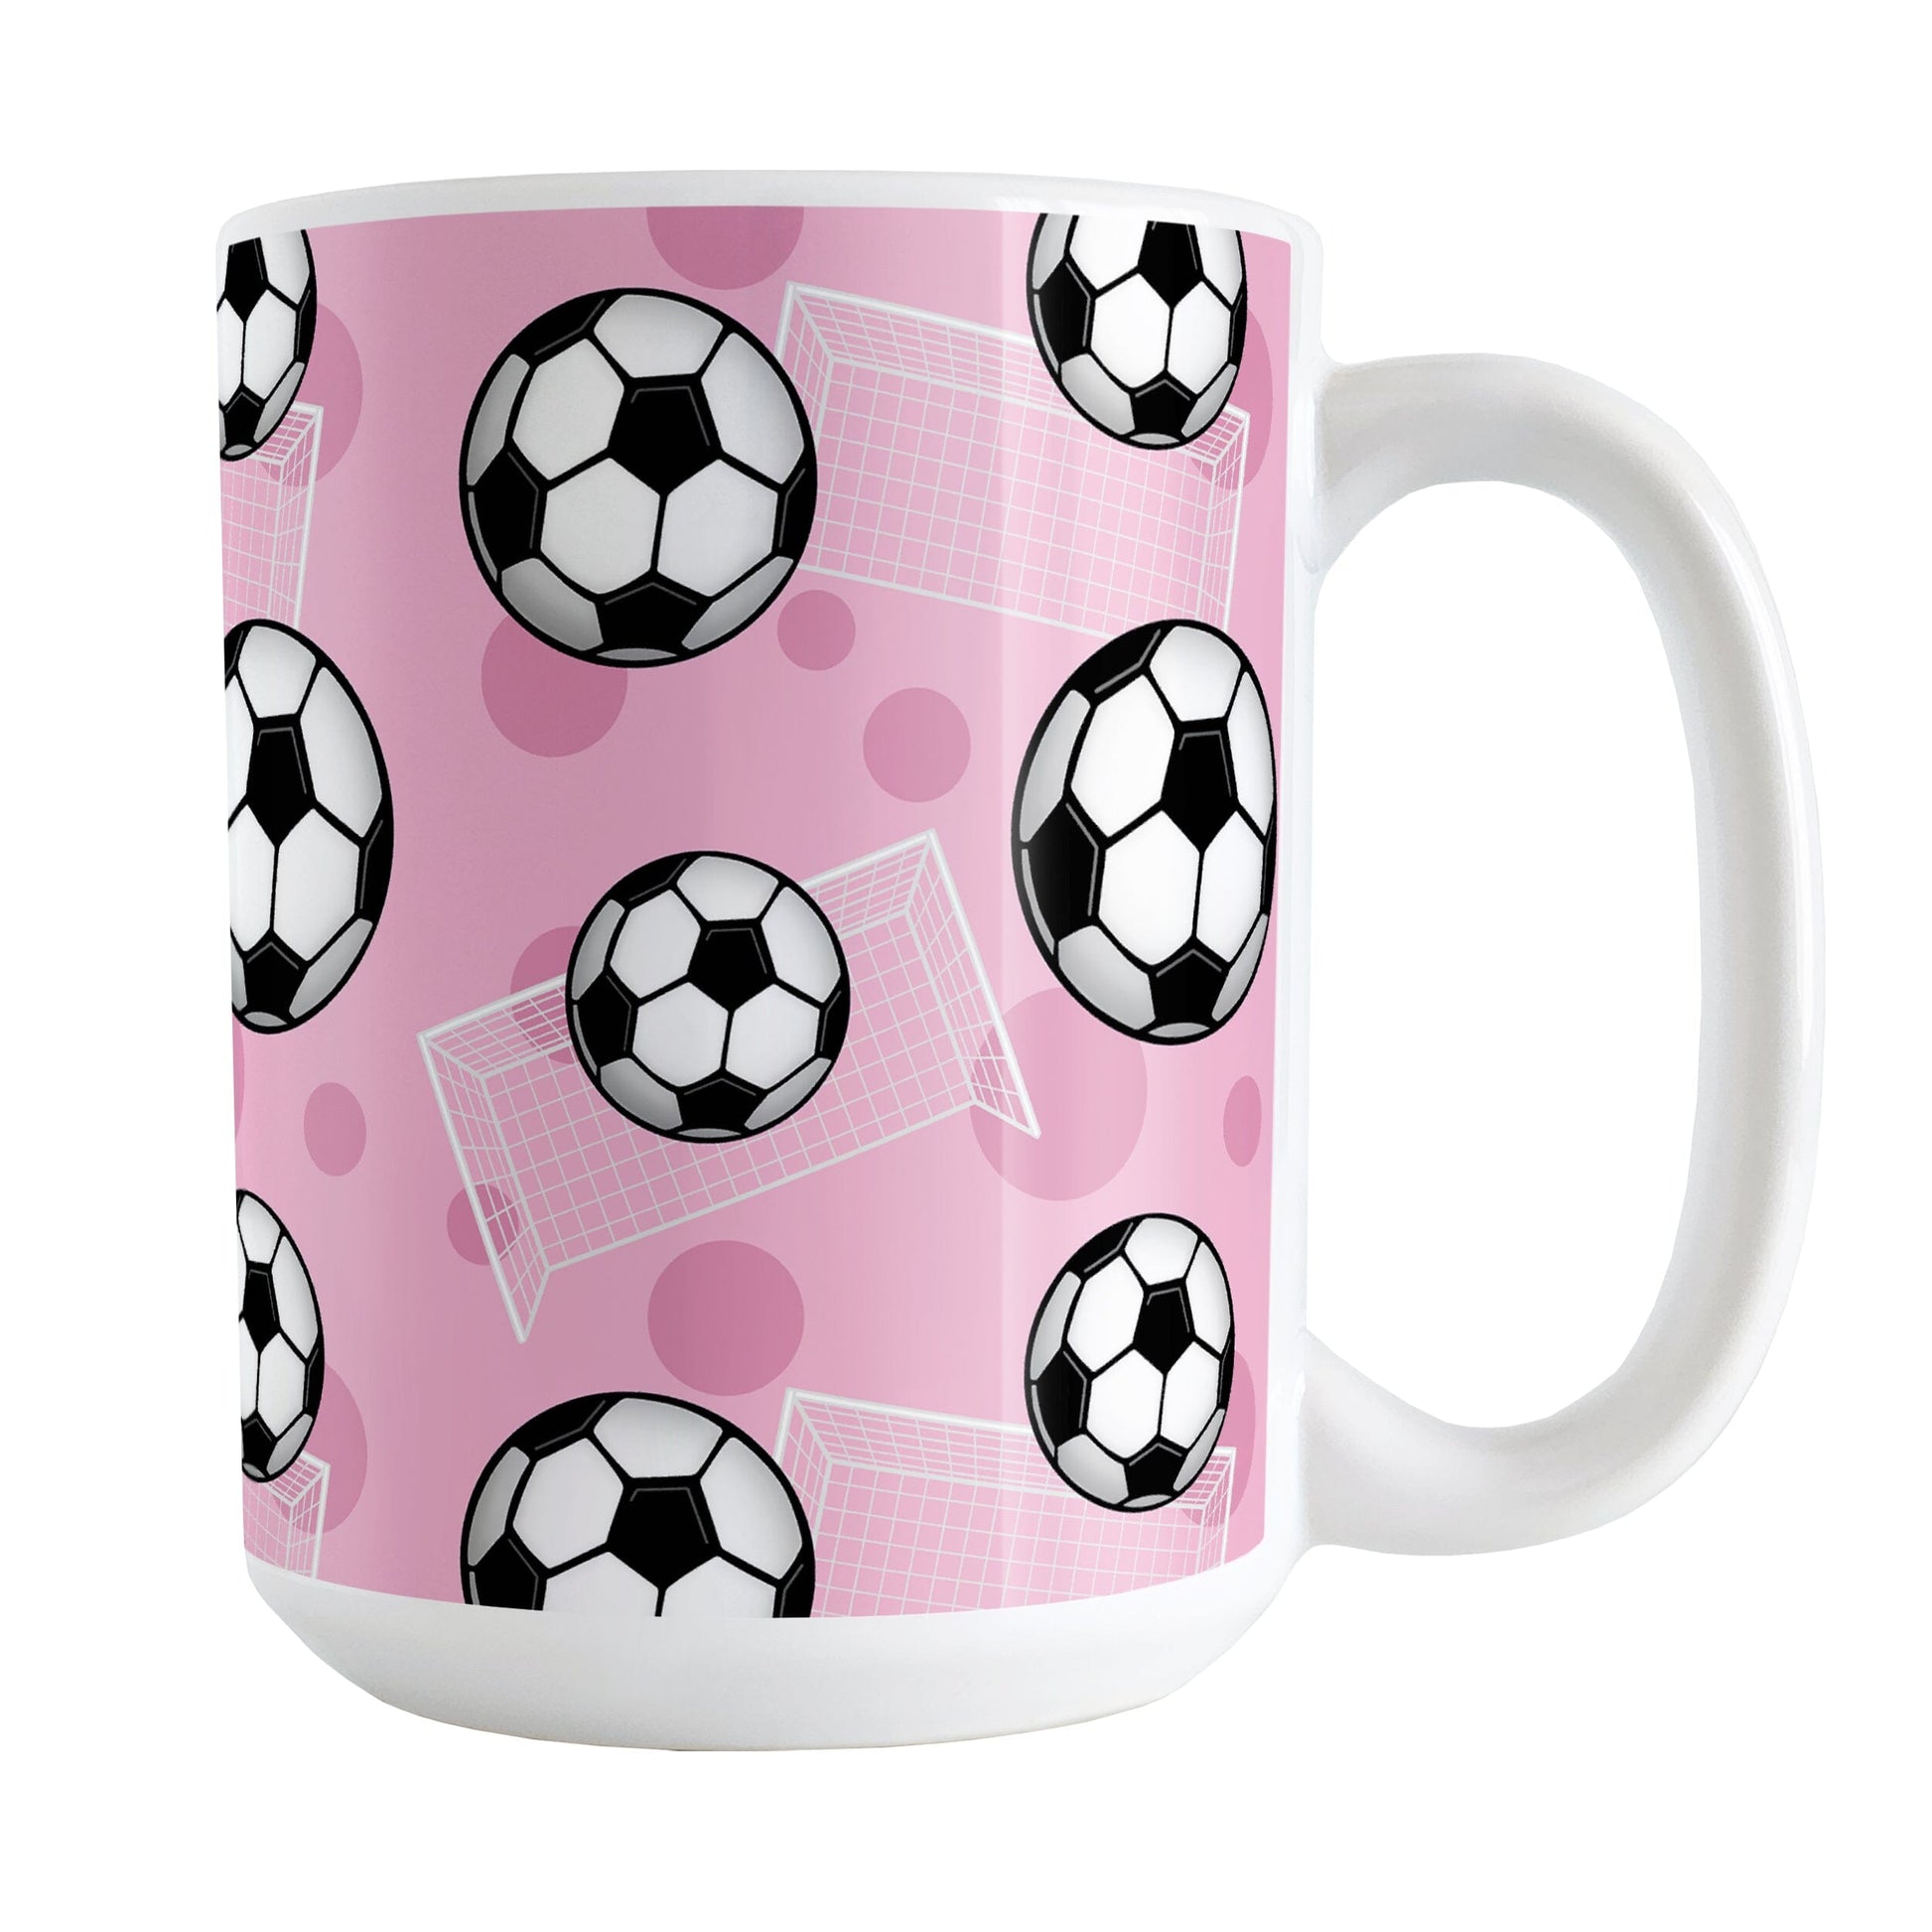 Soccer Ball and Goal Pattern Pink Mug (15oz) at Amy's Coffee Mugs. A ceramic coffee mug designed with a pattern of soccer balls and white soccer goals over a pink background with pink circles.